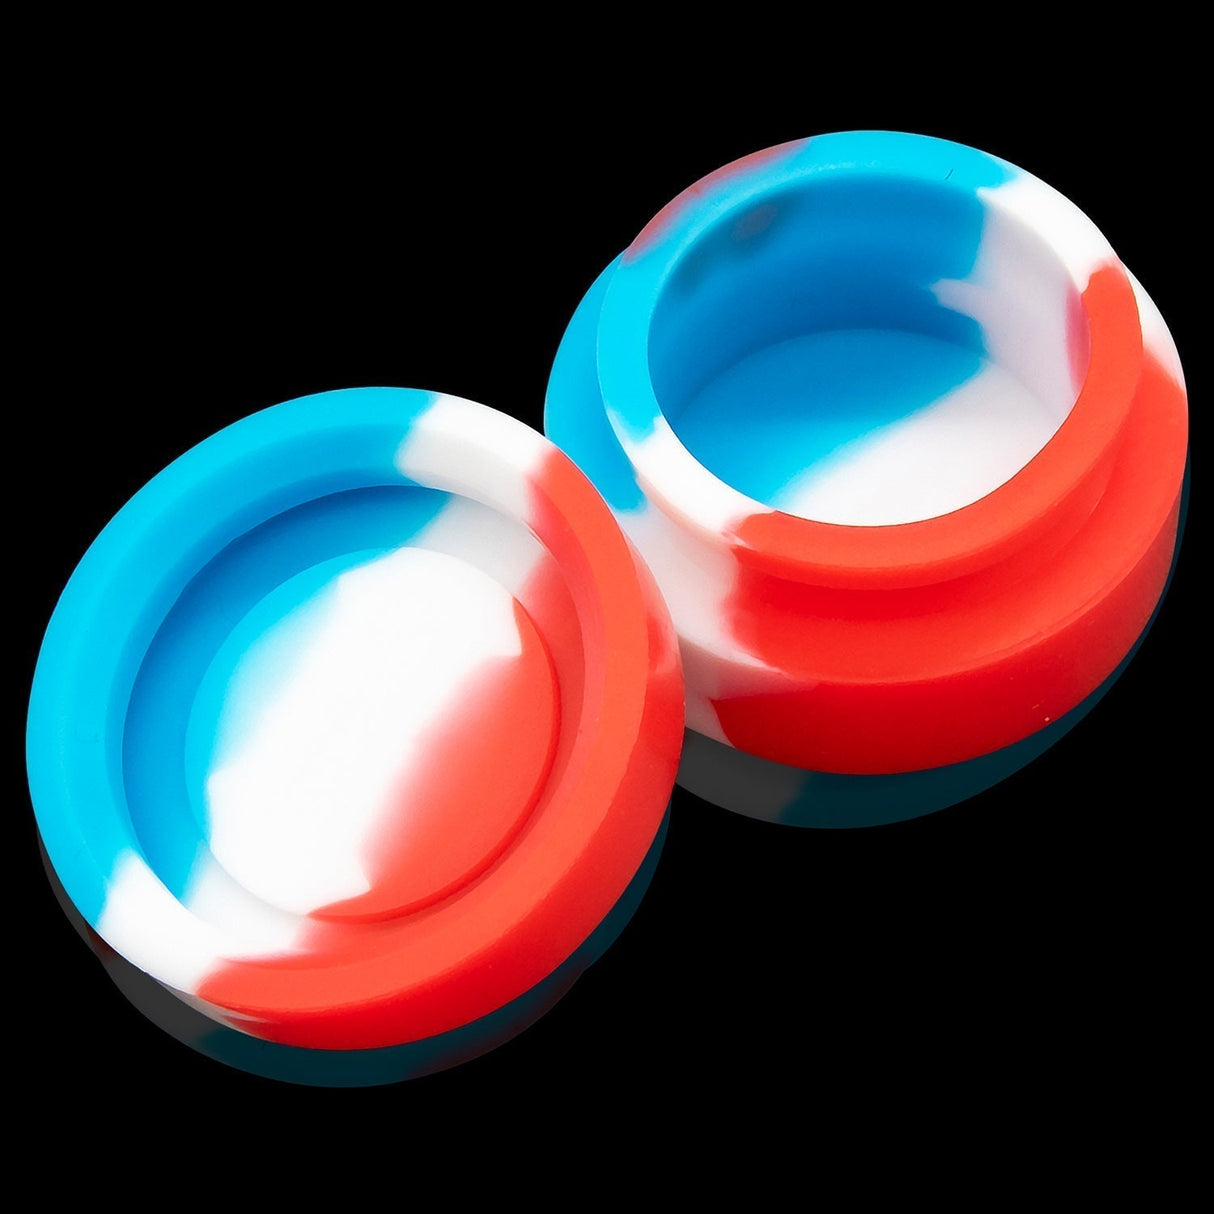 Close up of red, white, and blue silicone container.